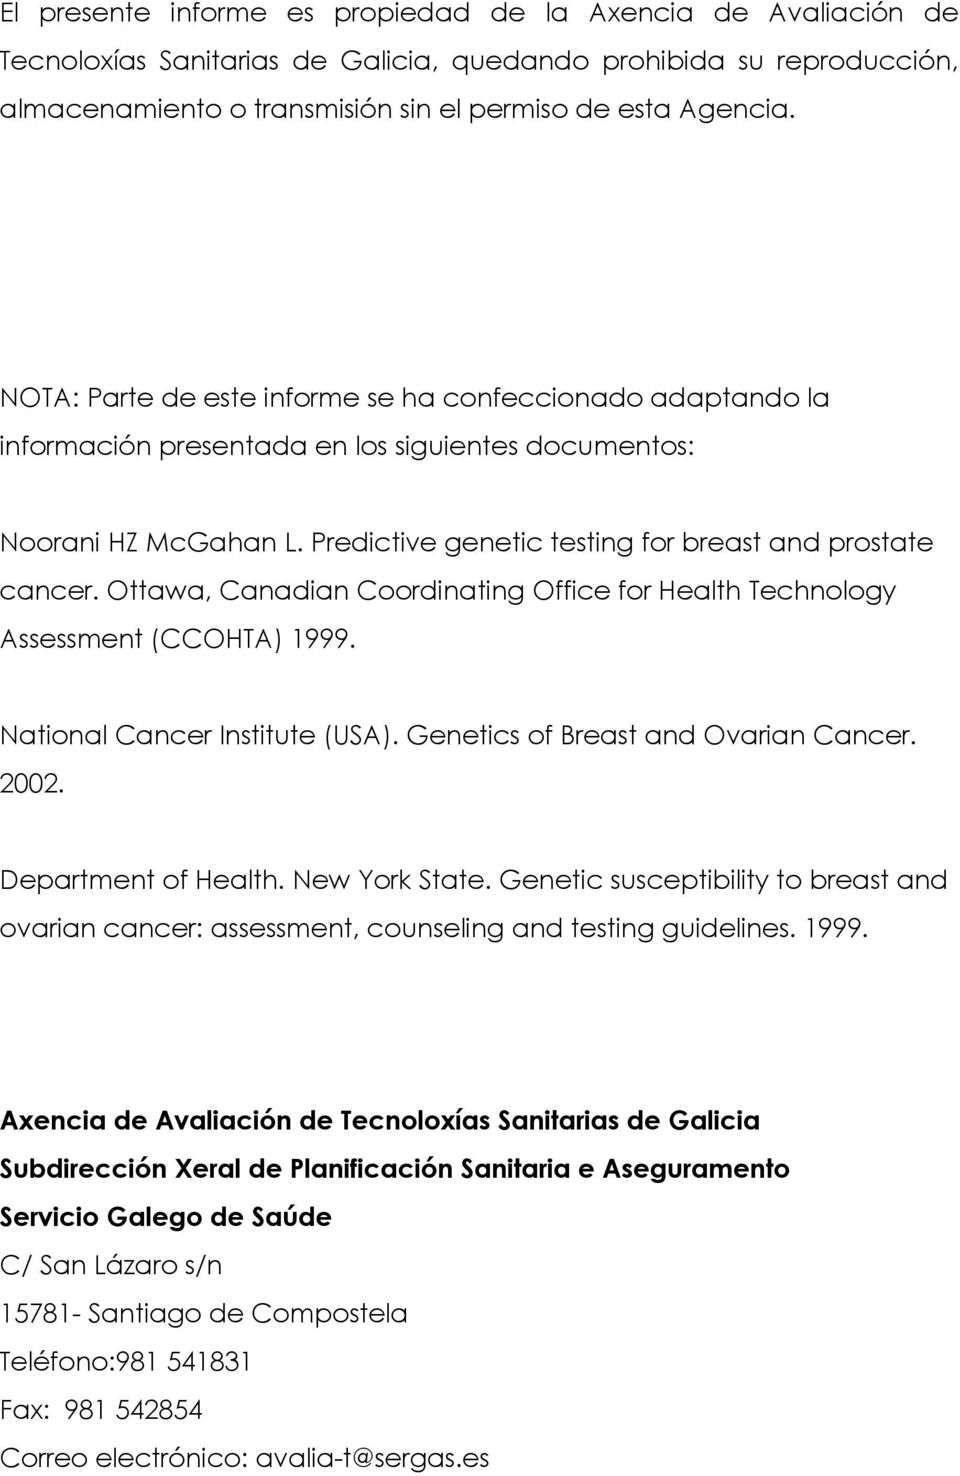 Ottawa, Canadian Coordinating Office for Health Technology Assessment (CCOHTA) 1999. National Cancer Institute (USA). Genetics of Breast and Ovarian Cancer. 2002. Department of Health. New York State.